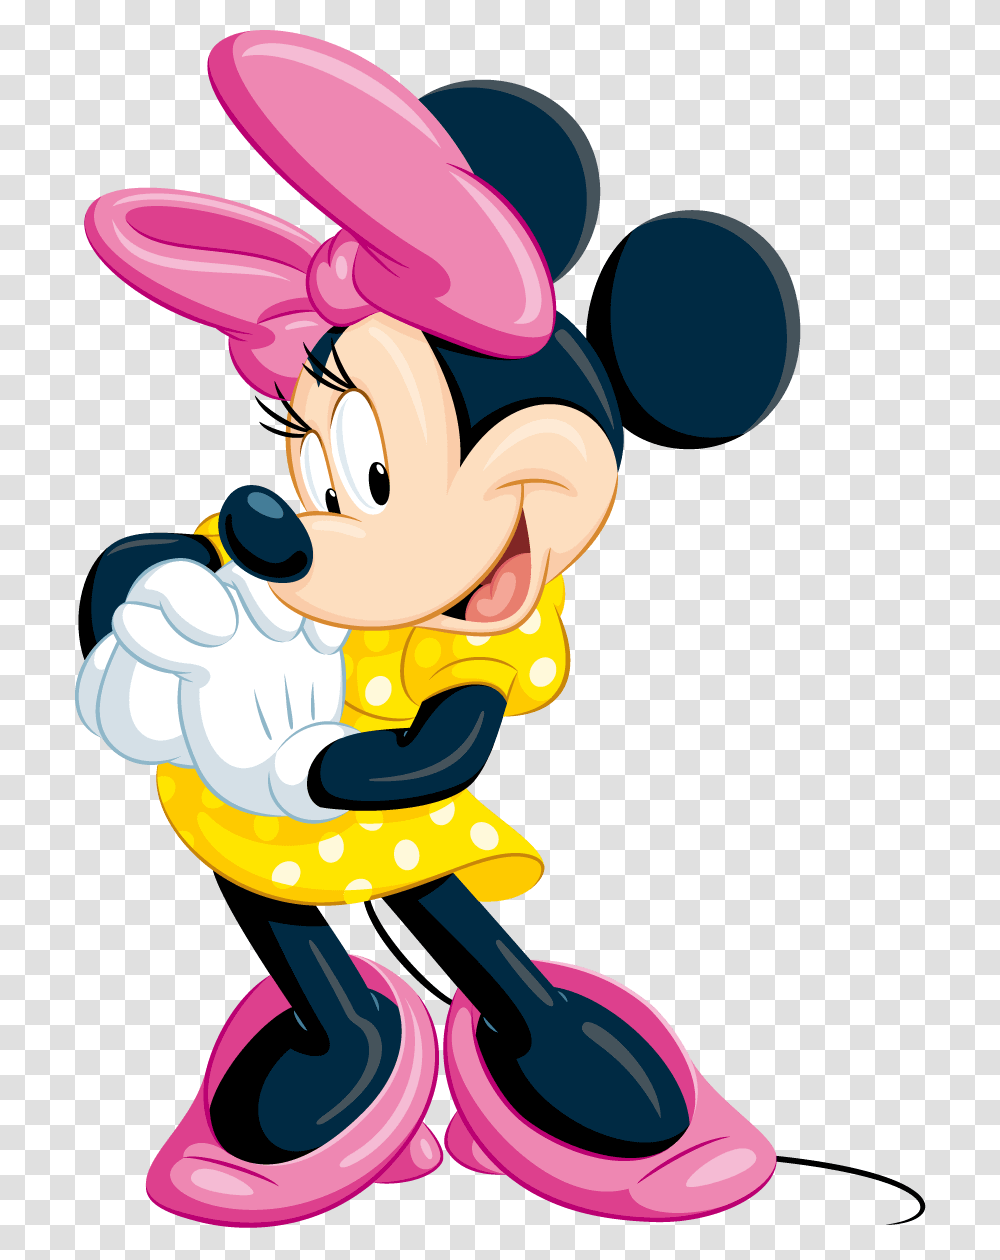 Free Minnie Mouse Clip Art Cliparting Birthday Minnie, Plant, Comics, Book Transparent Png